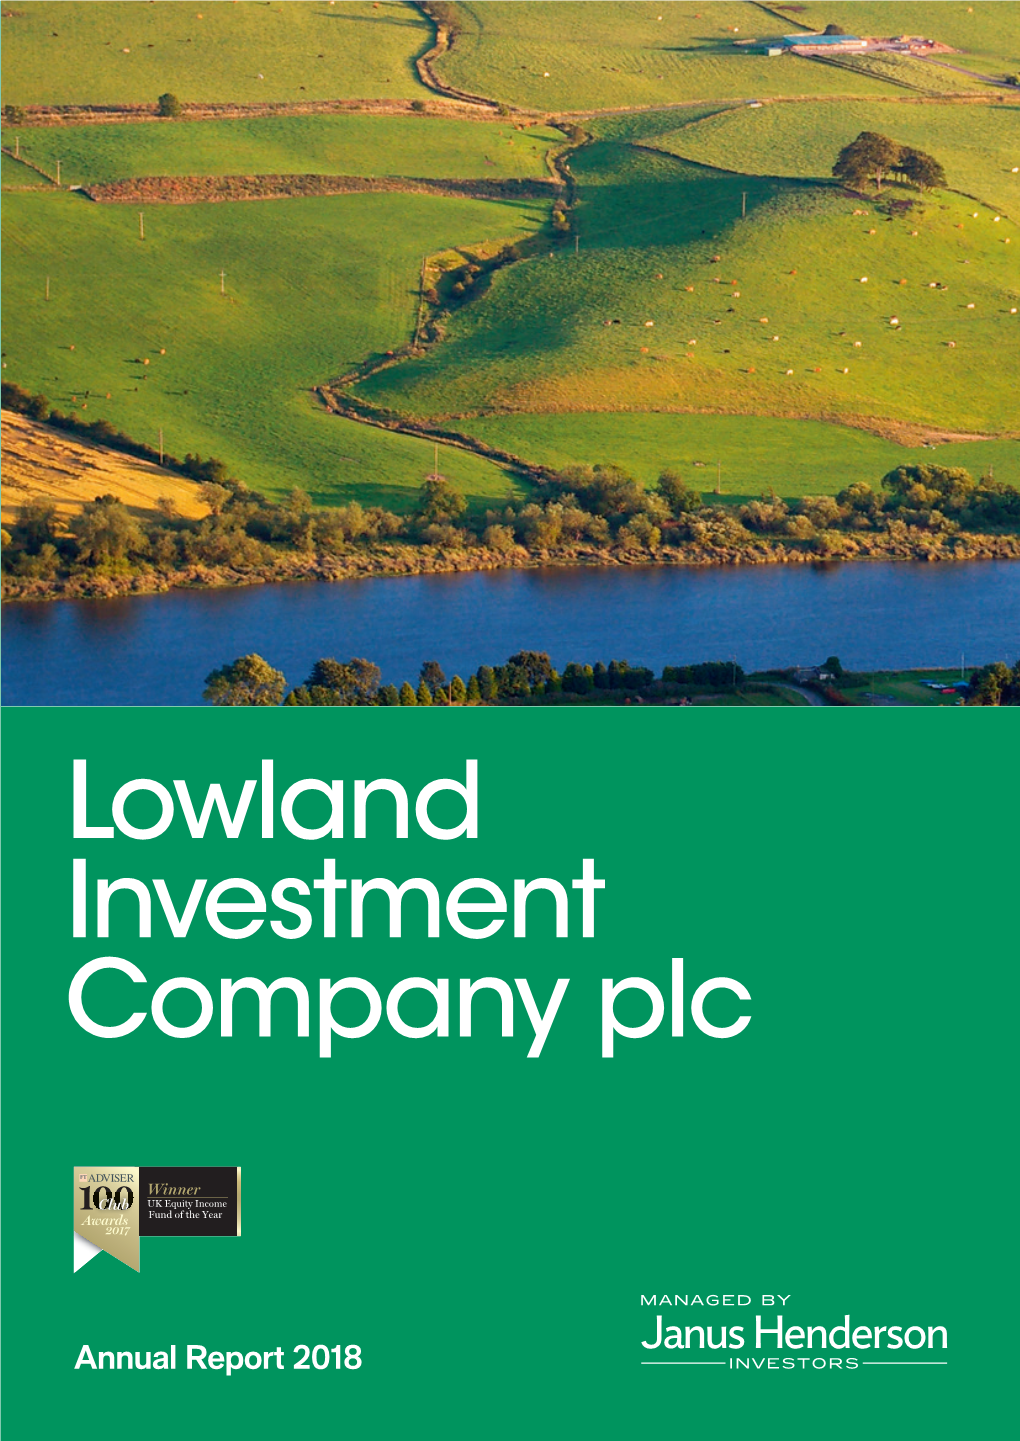 Lowland Investment Company